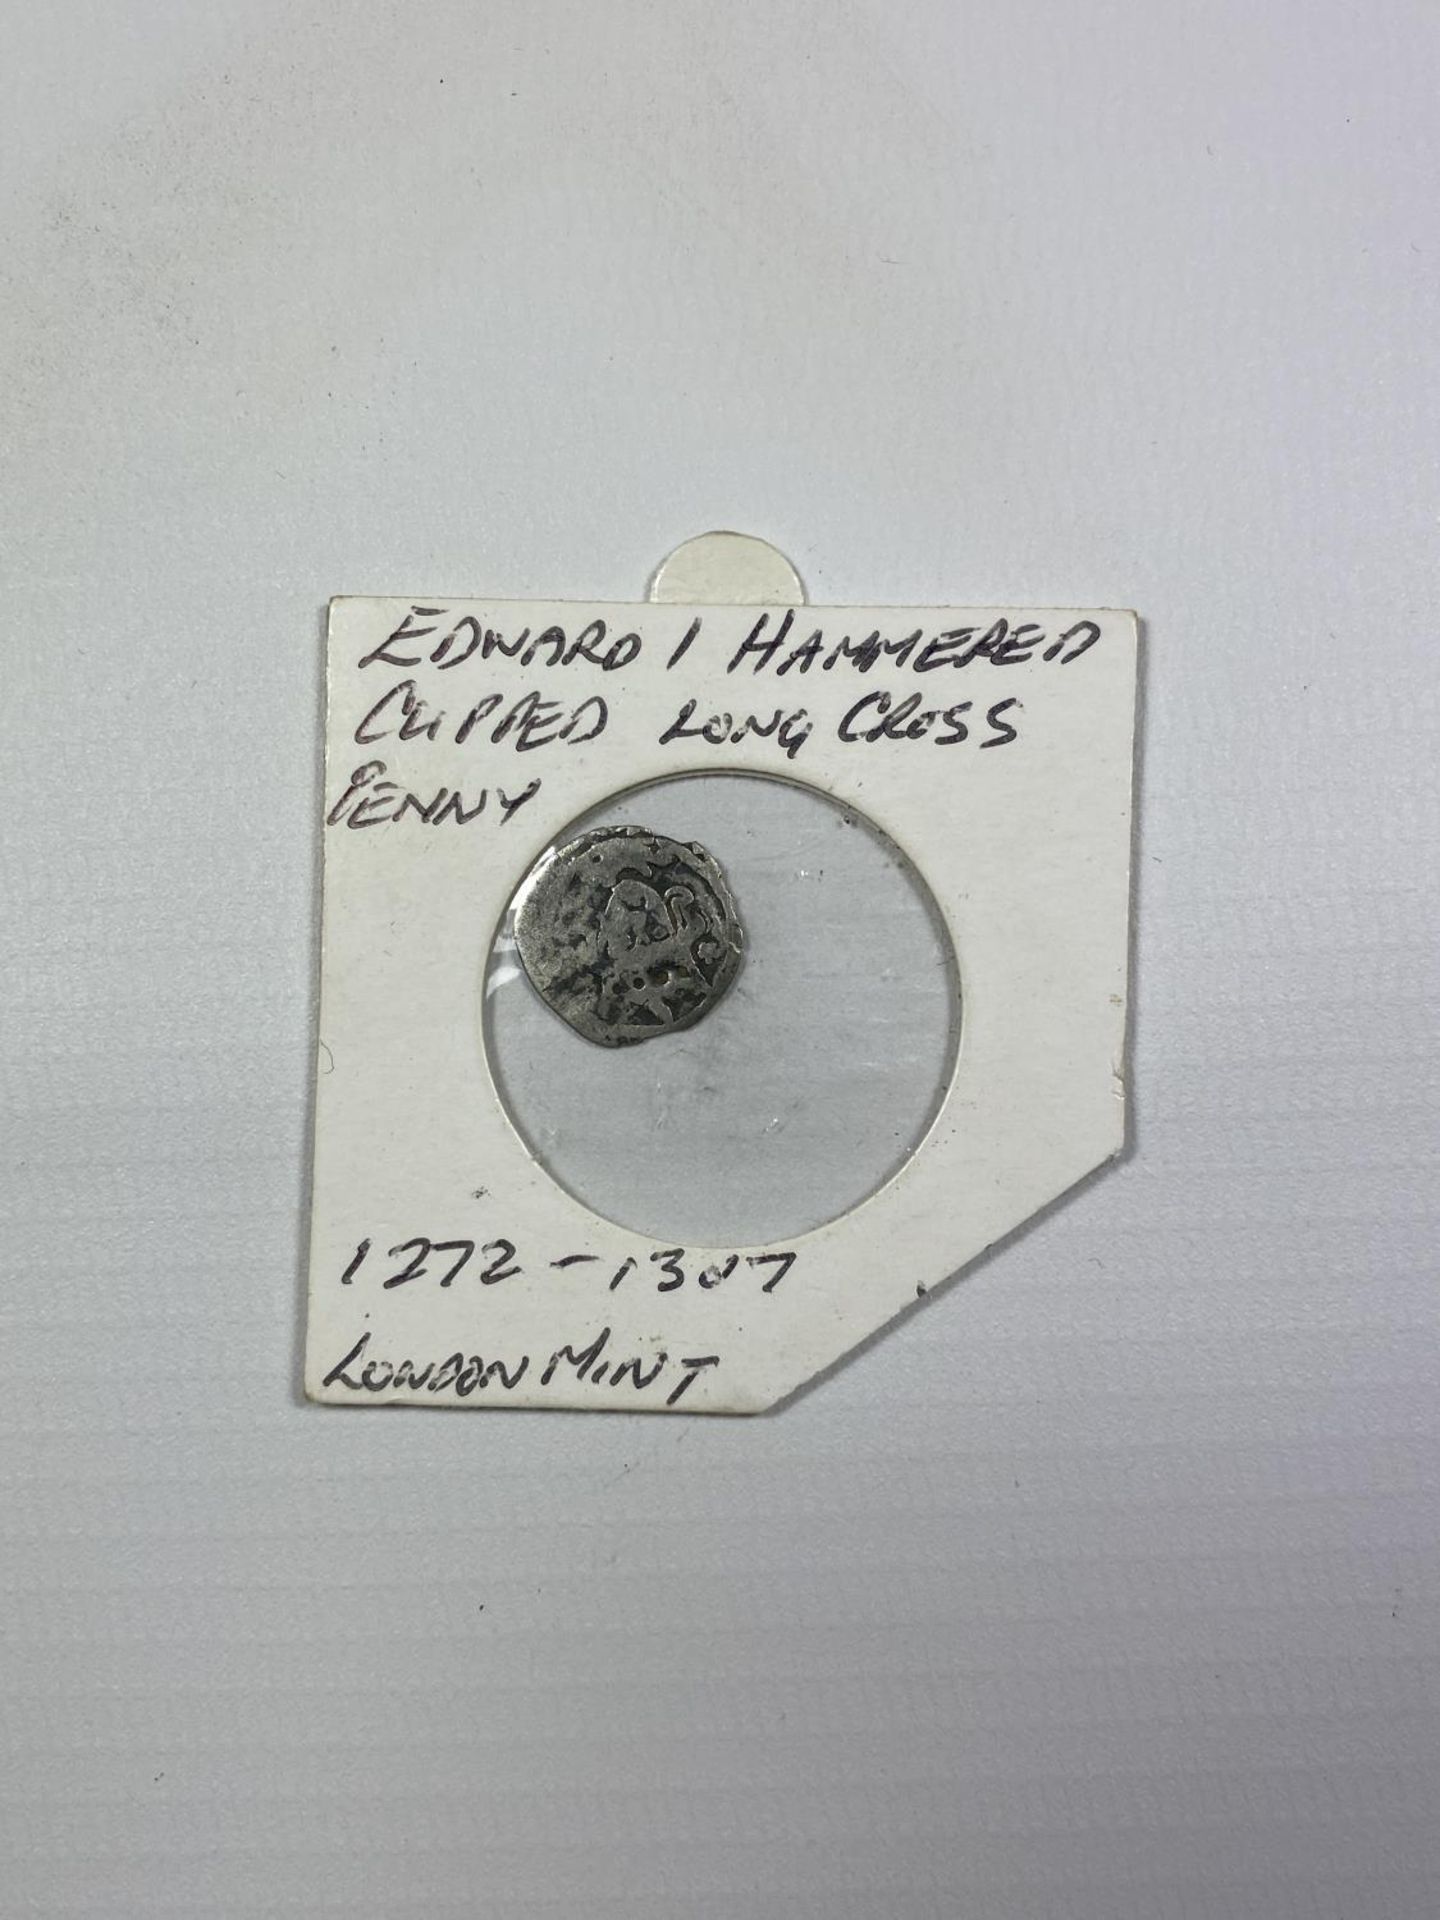 AN EDWARD I HAMMERED CLIPPED LONG CROSS PENNY